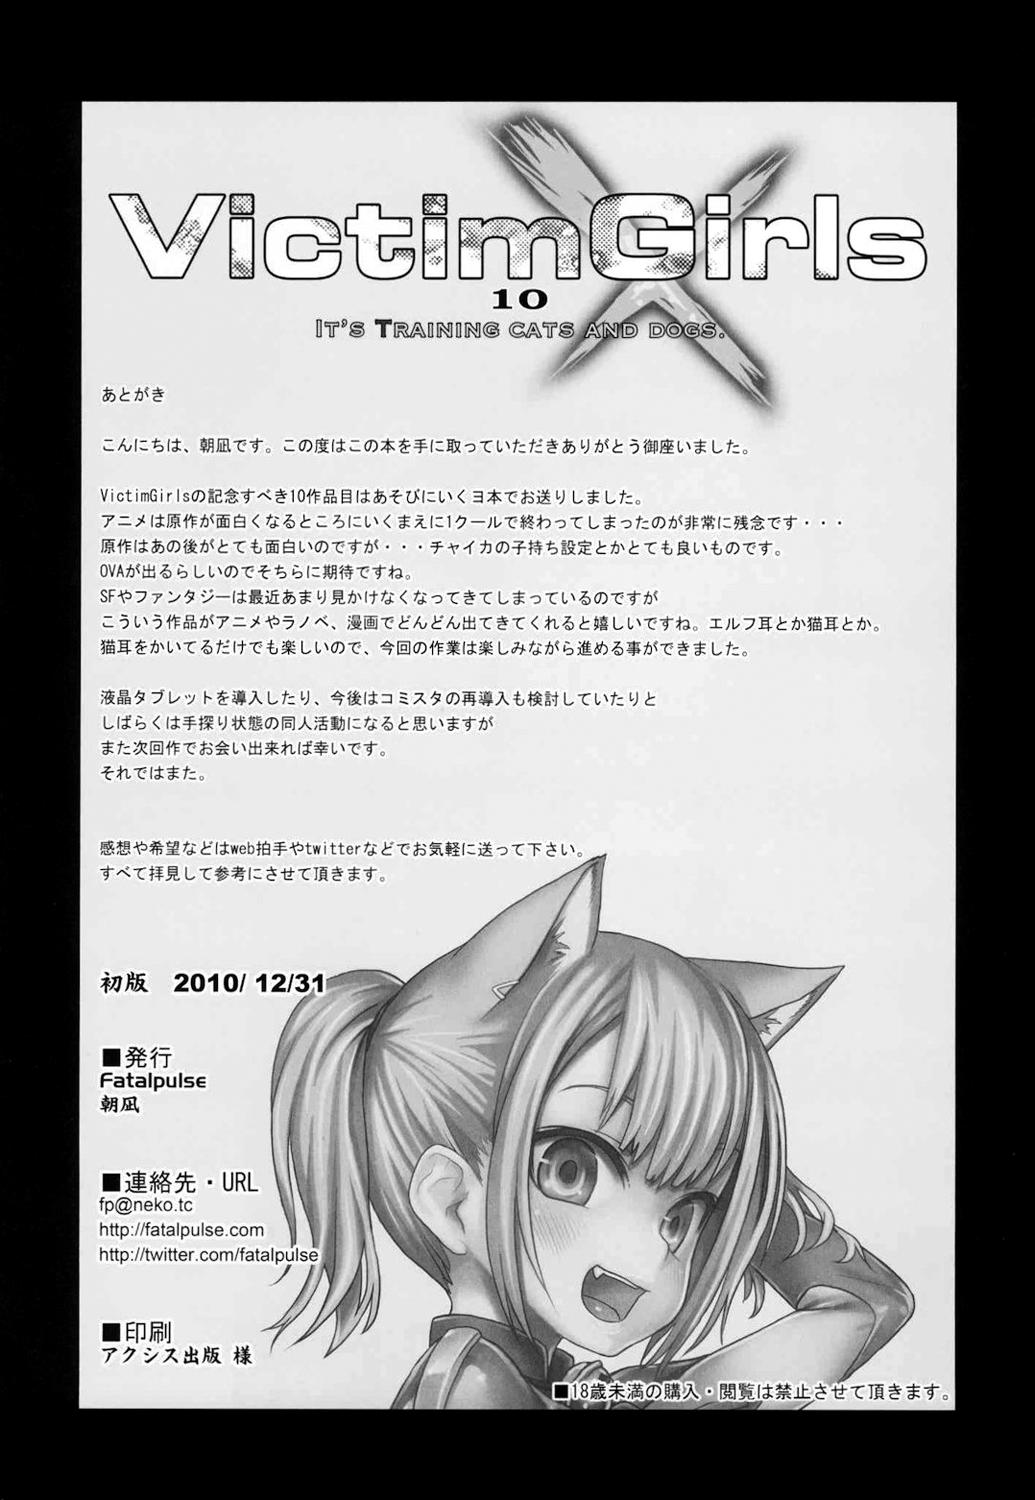 Victim Girls 10 - It's Training Cats and Dogs. 33